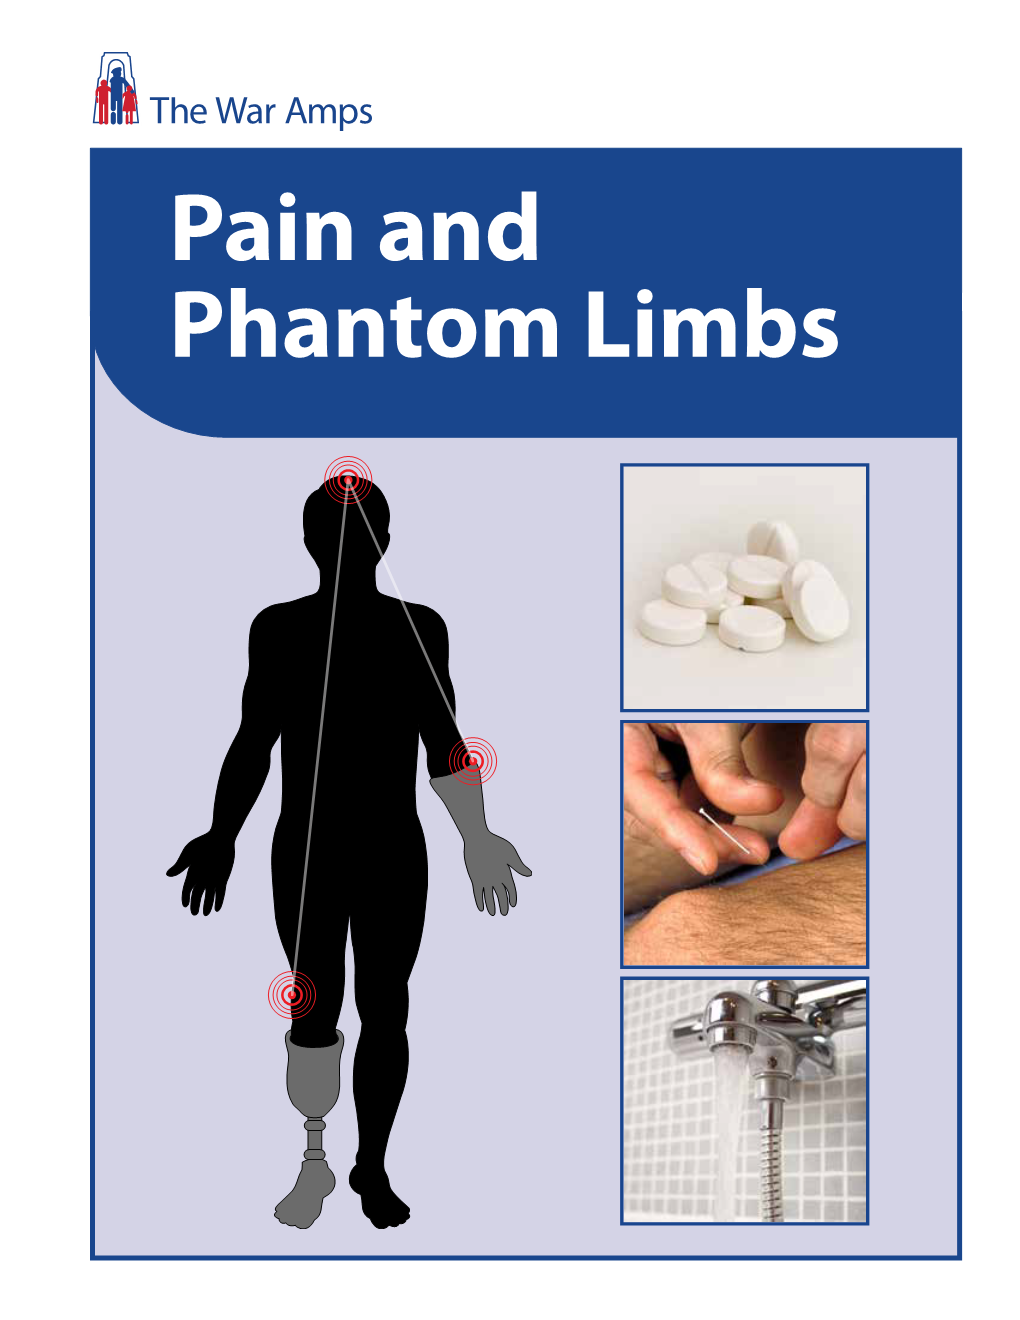 Pain and Phantom Limbs Pain and Phantom Limbs Is Published by the War Amps of Canada